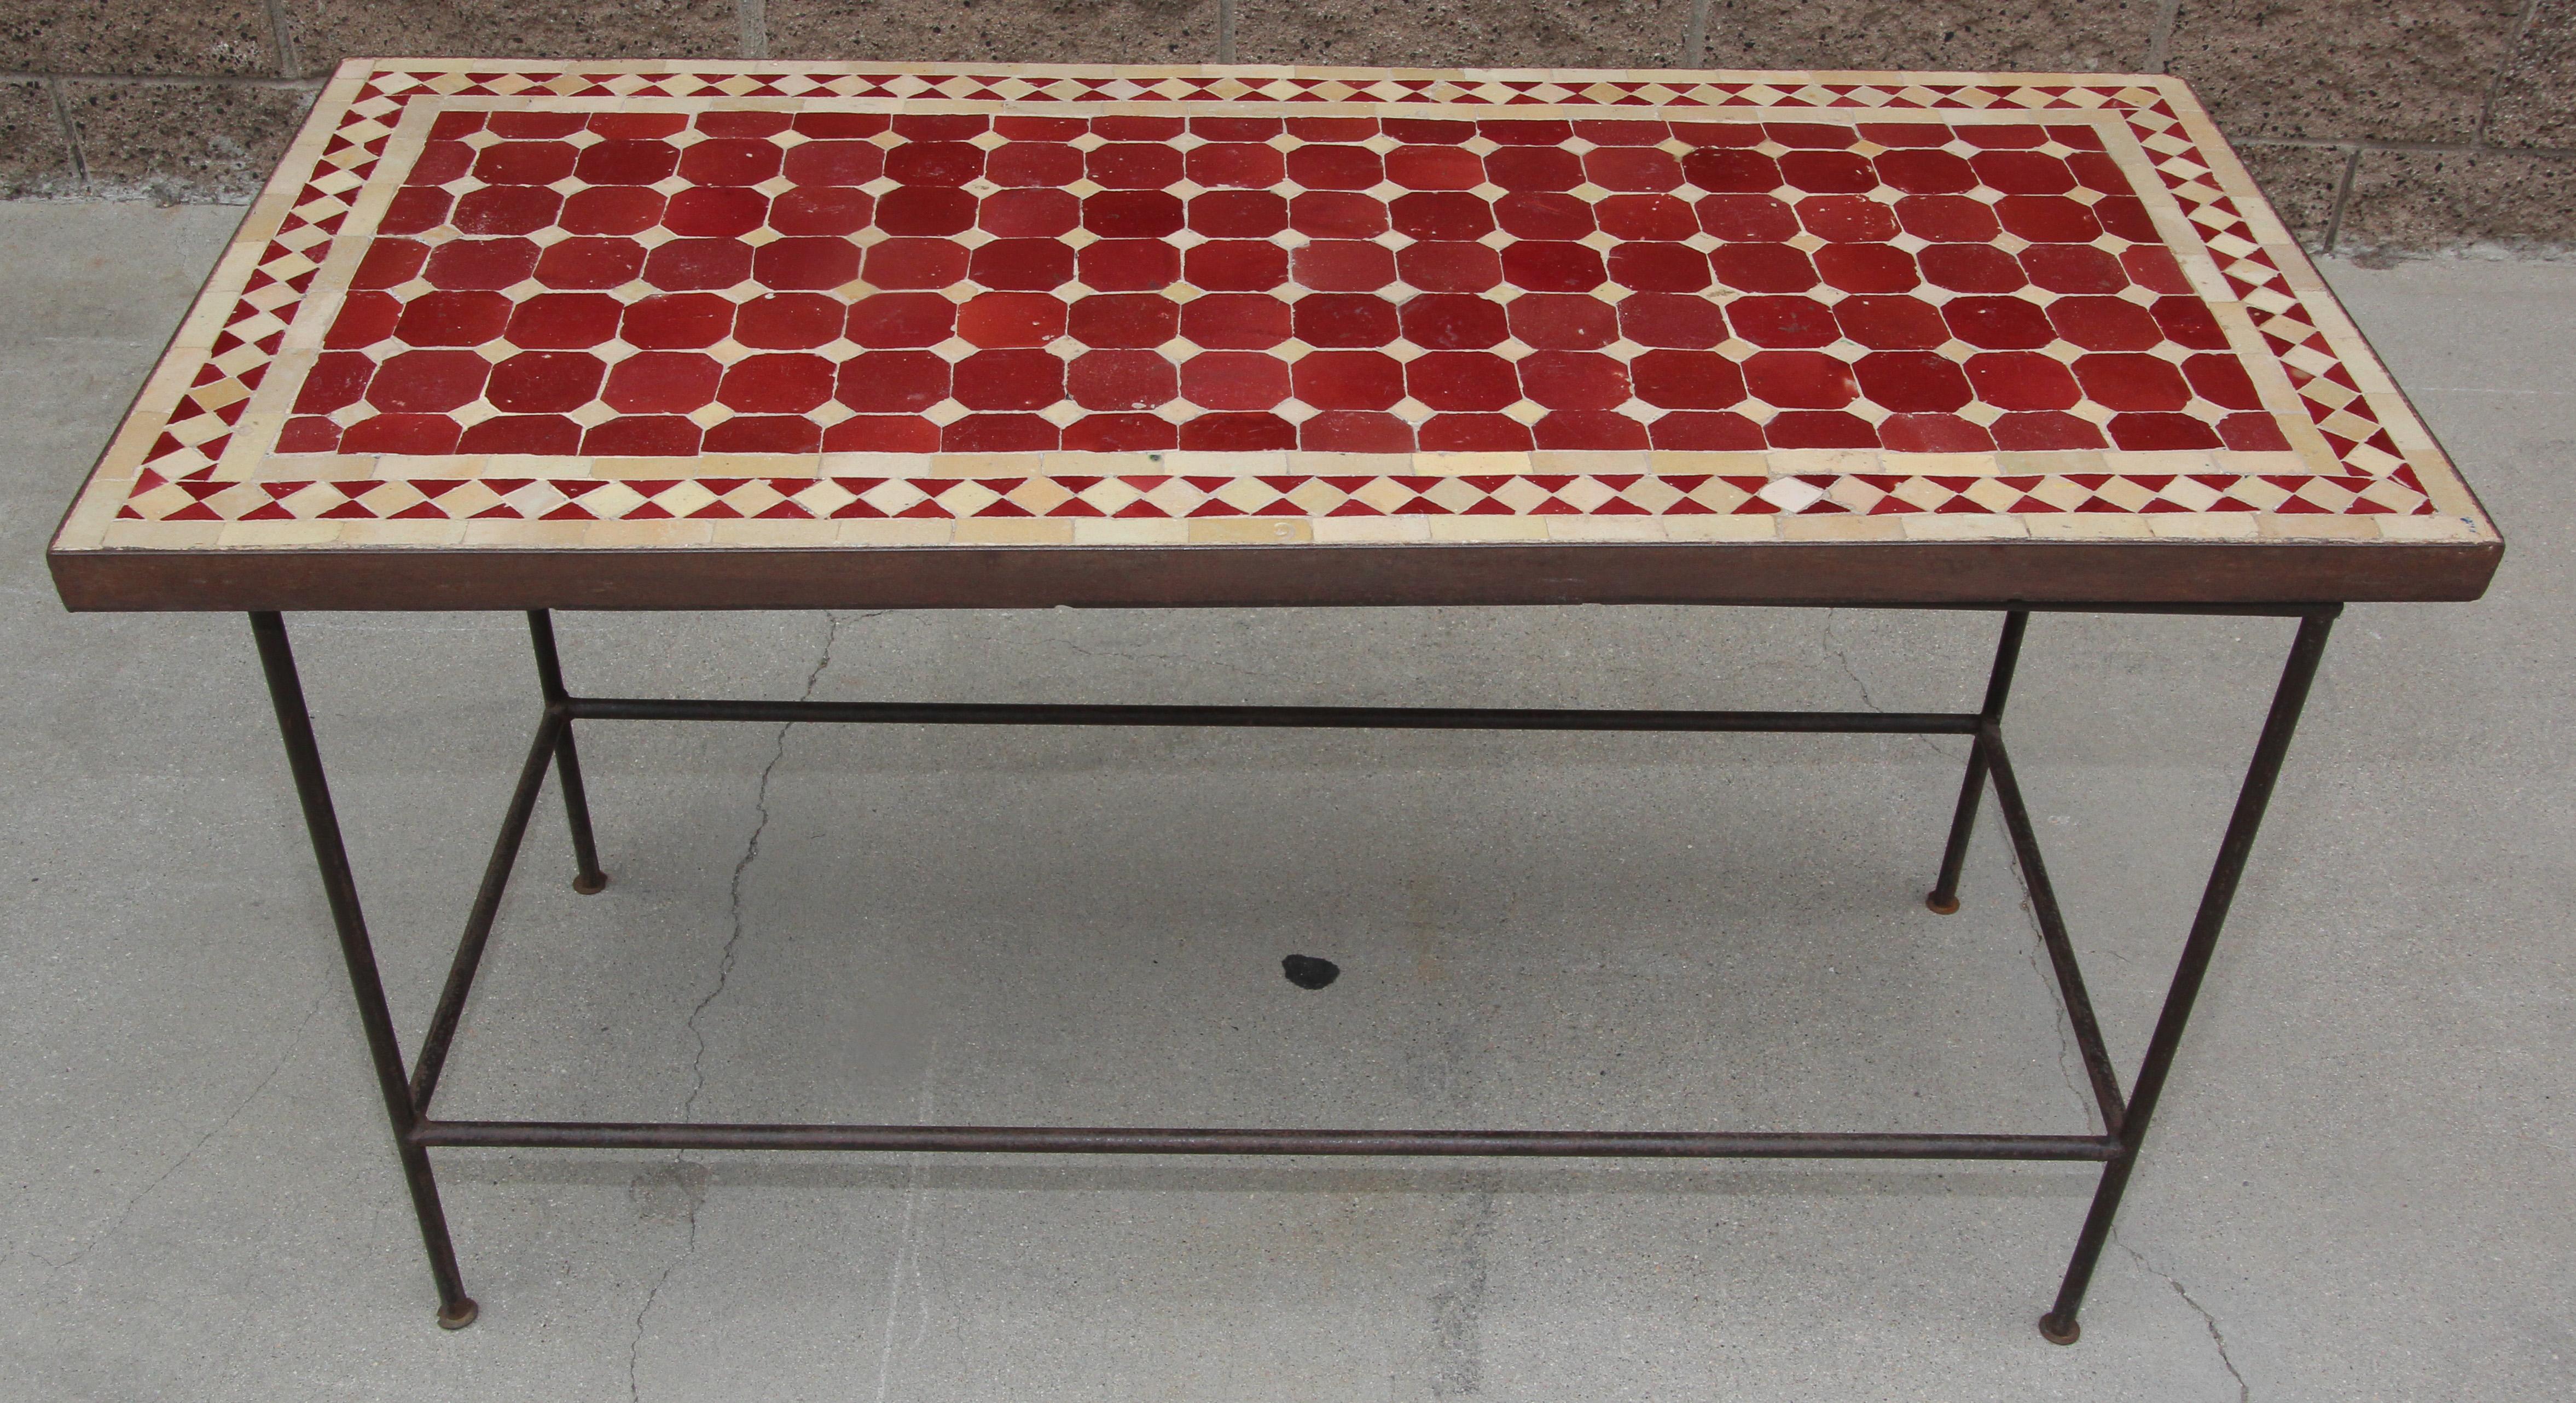 Handcrafted vintage mosaic tile tabletop, handmade using reclaimed Moroccan tiles in dark red color.
Moroccan mosaic side table, delicately handcrafted in fez with traditional glazed red tiles.
The handcrafted zellige tile table sits on a metal